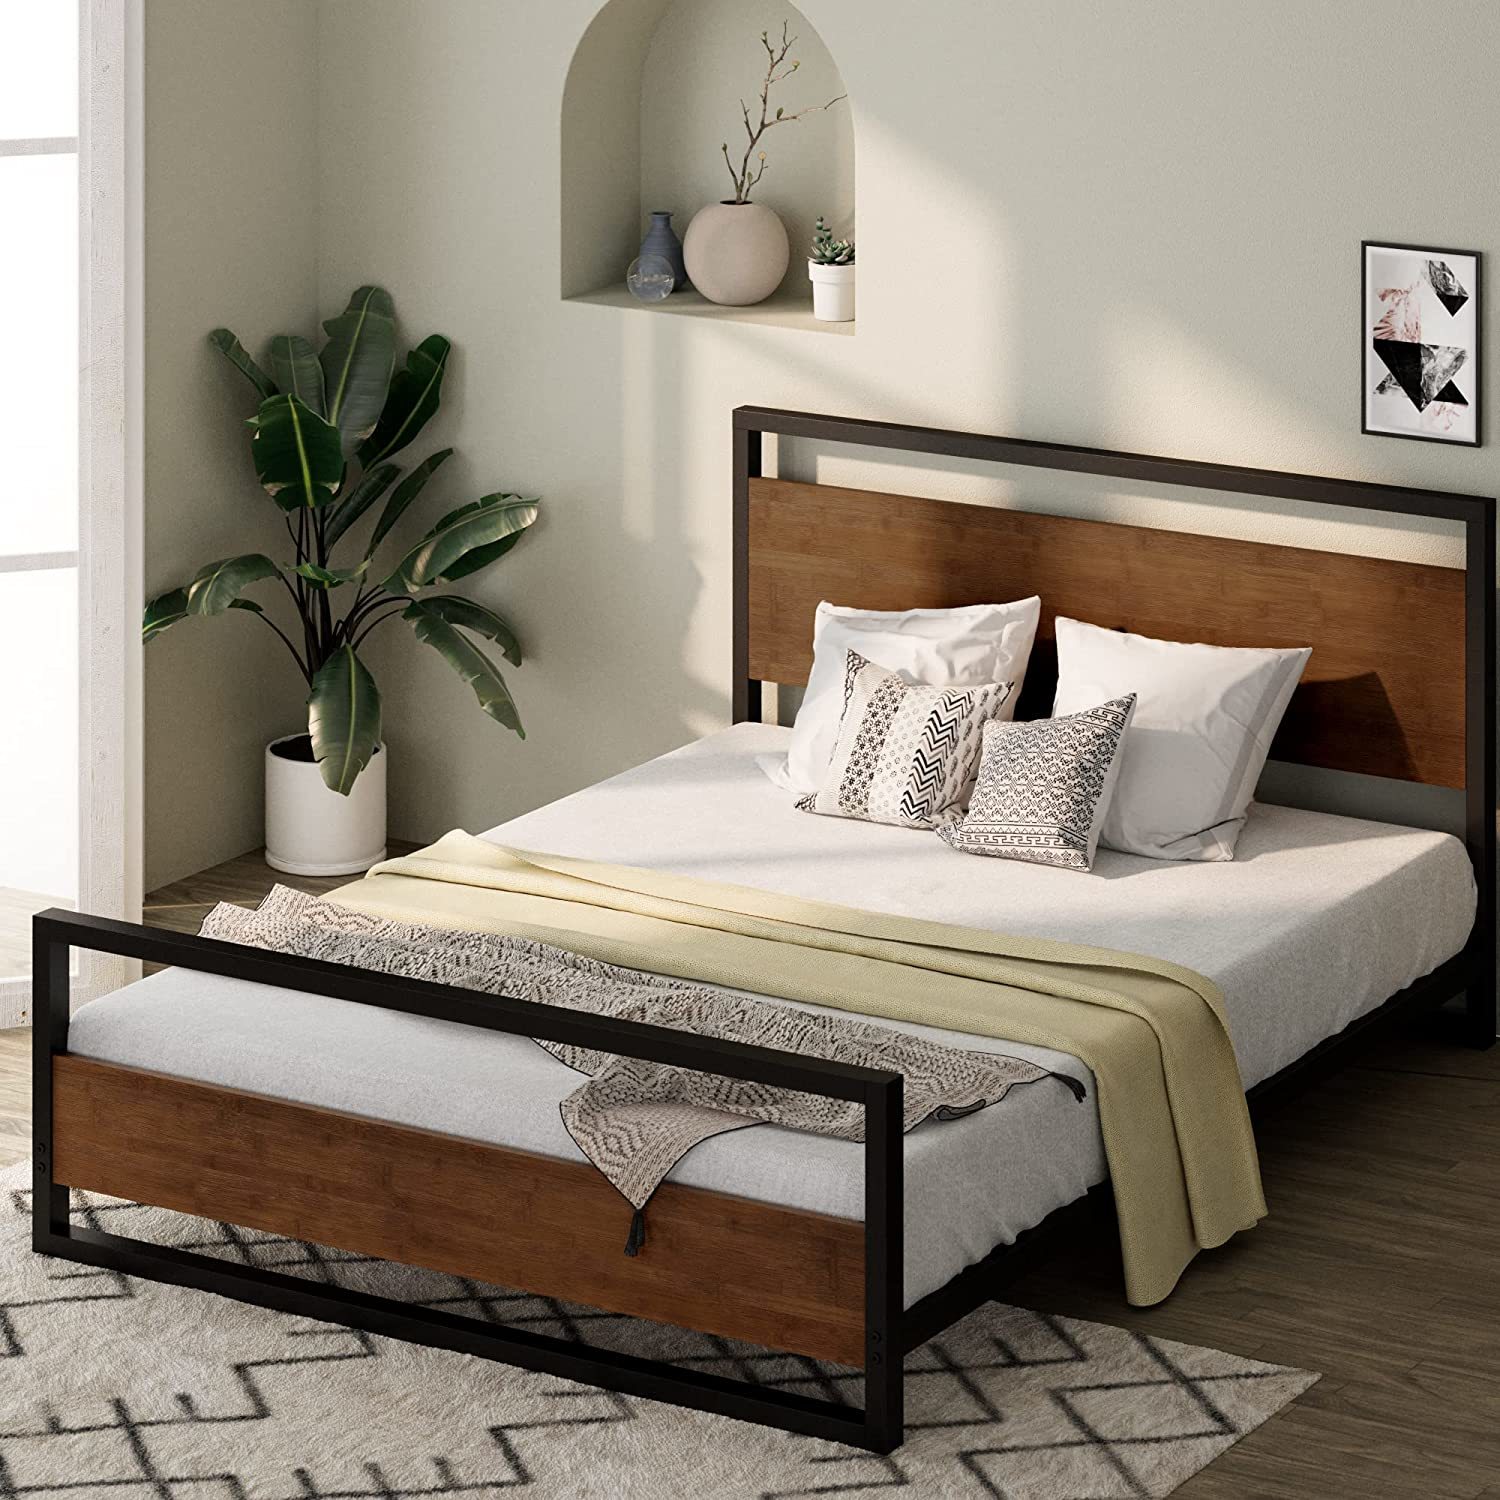 Primary image for Zinus Suzanne Bamboo And Metal Platform Bed Frame With Footboard / Wood, Queen